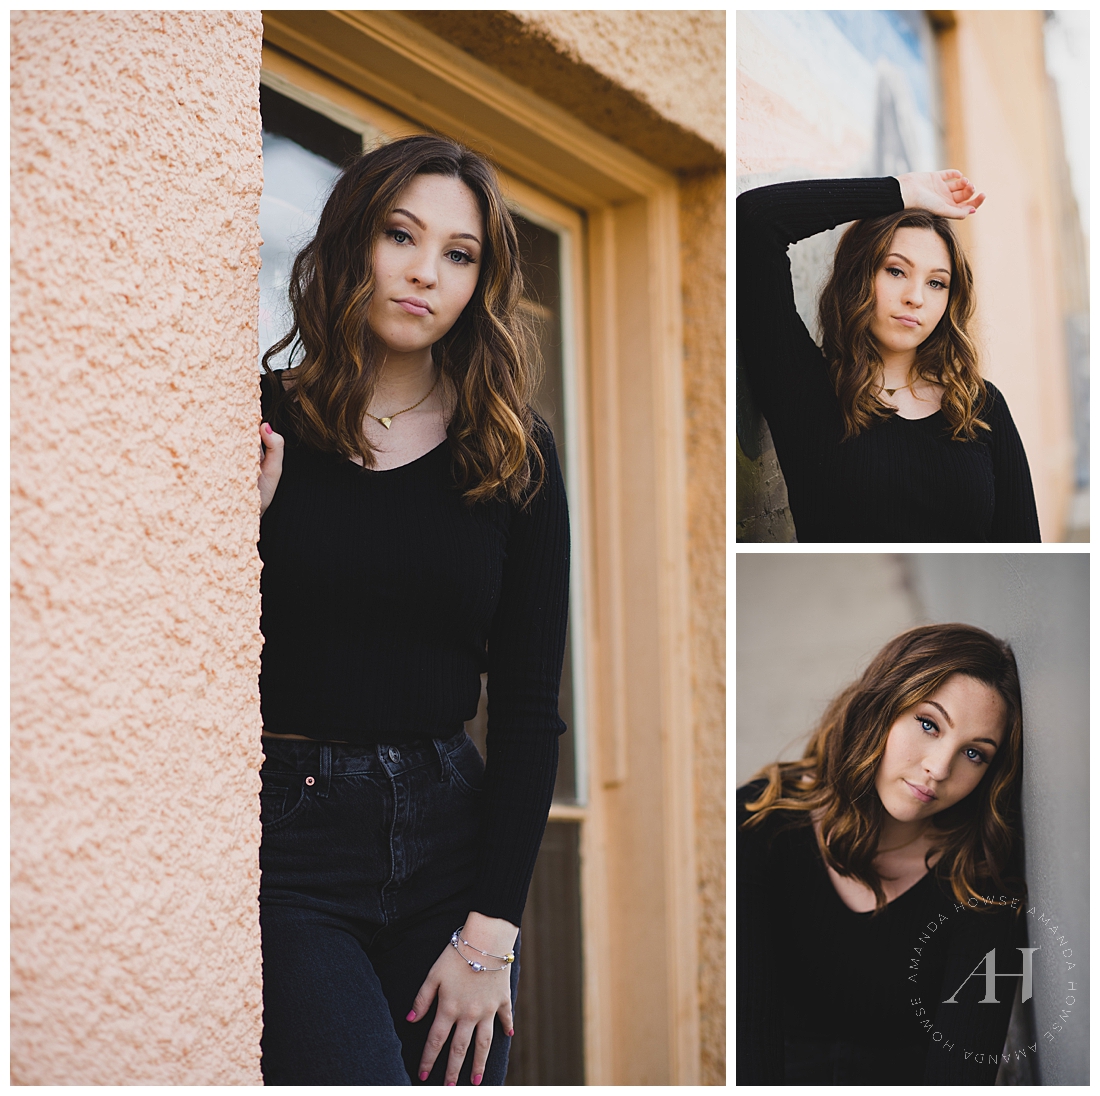 Tacoma Senior Portraits in October | How to Style Fall Portraits, What to Wear for Senior Portraits, Hair and Makeup Ideas for Senior Portraits | Photographed by the Best Tacoma Senior Photographer Amanda Howse